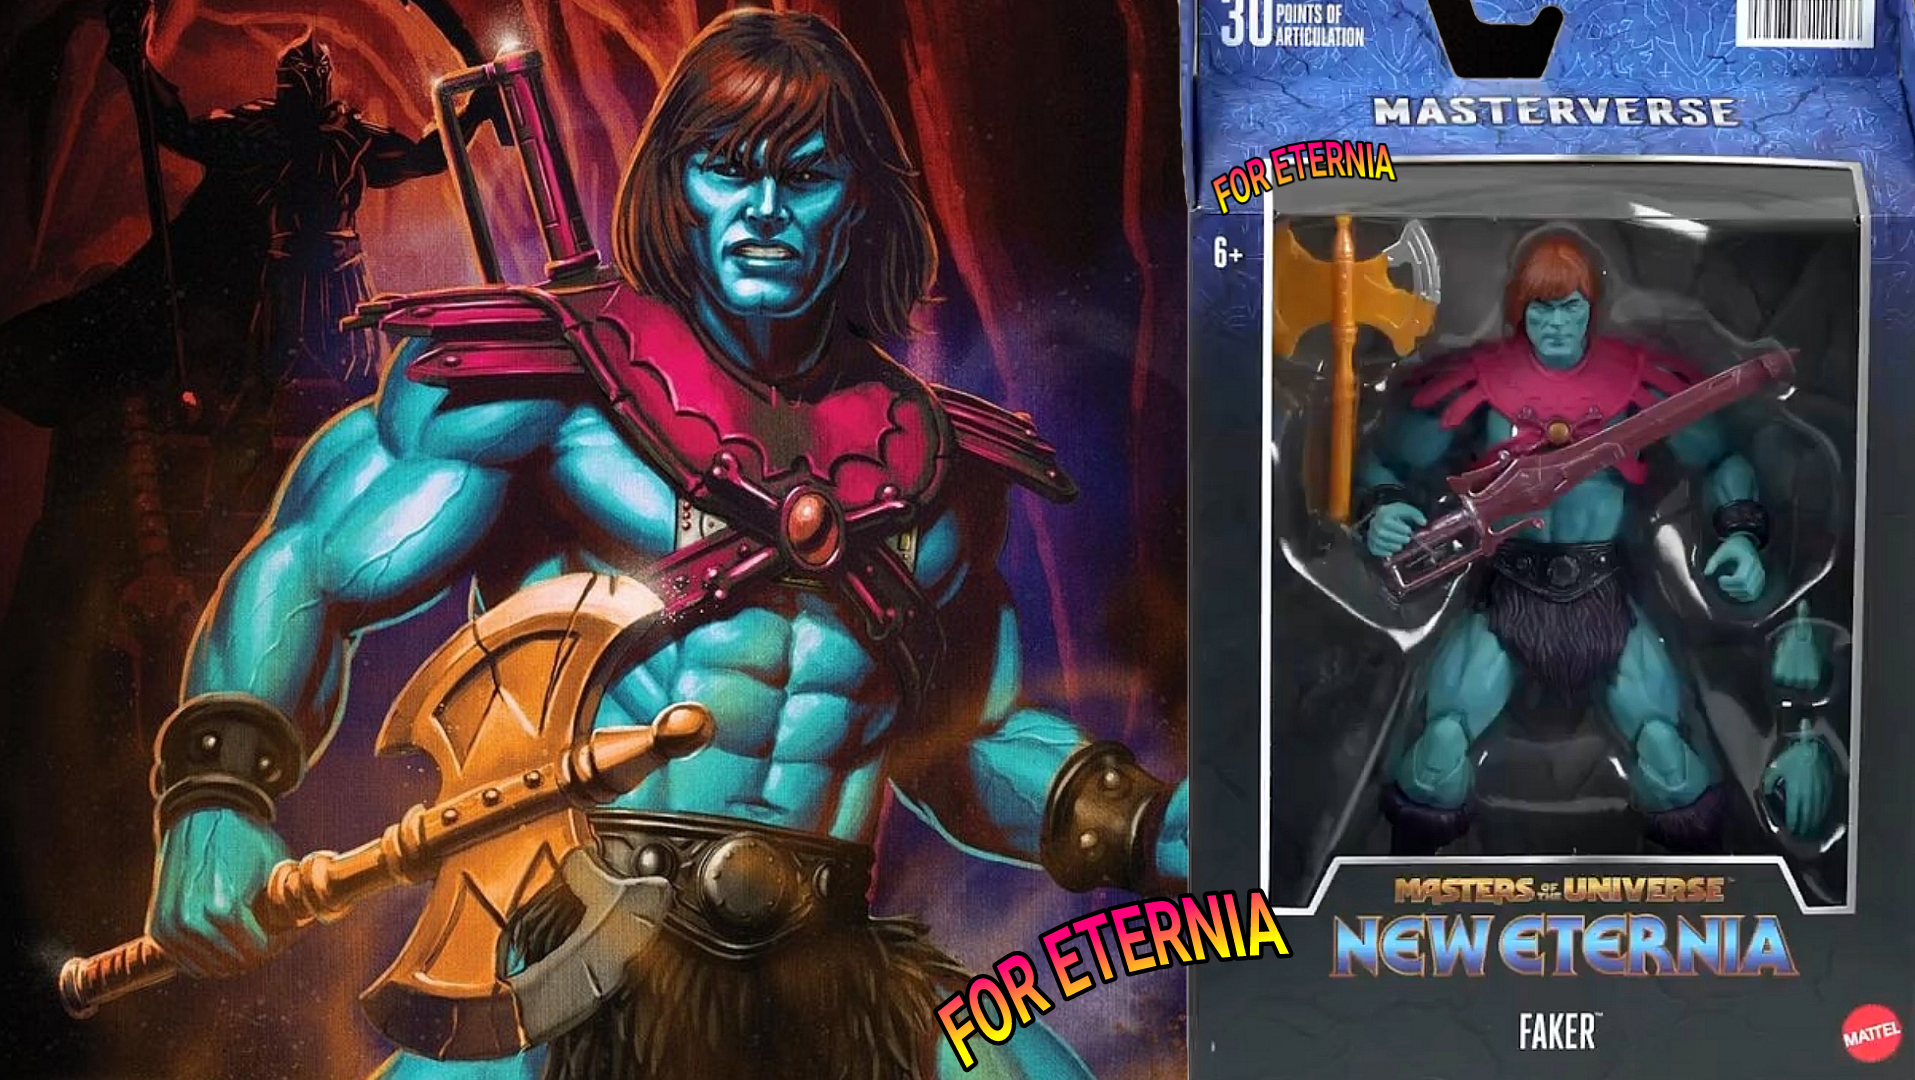 Masterverse New Eternia Faker Wave 9 packaging artwork and bio revealed